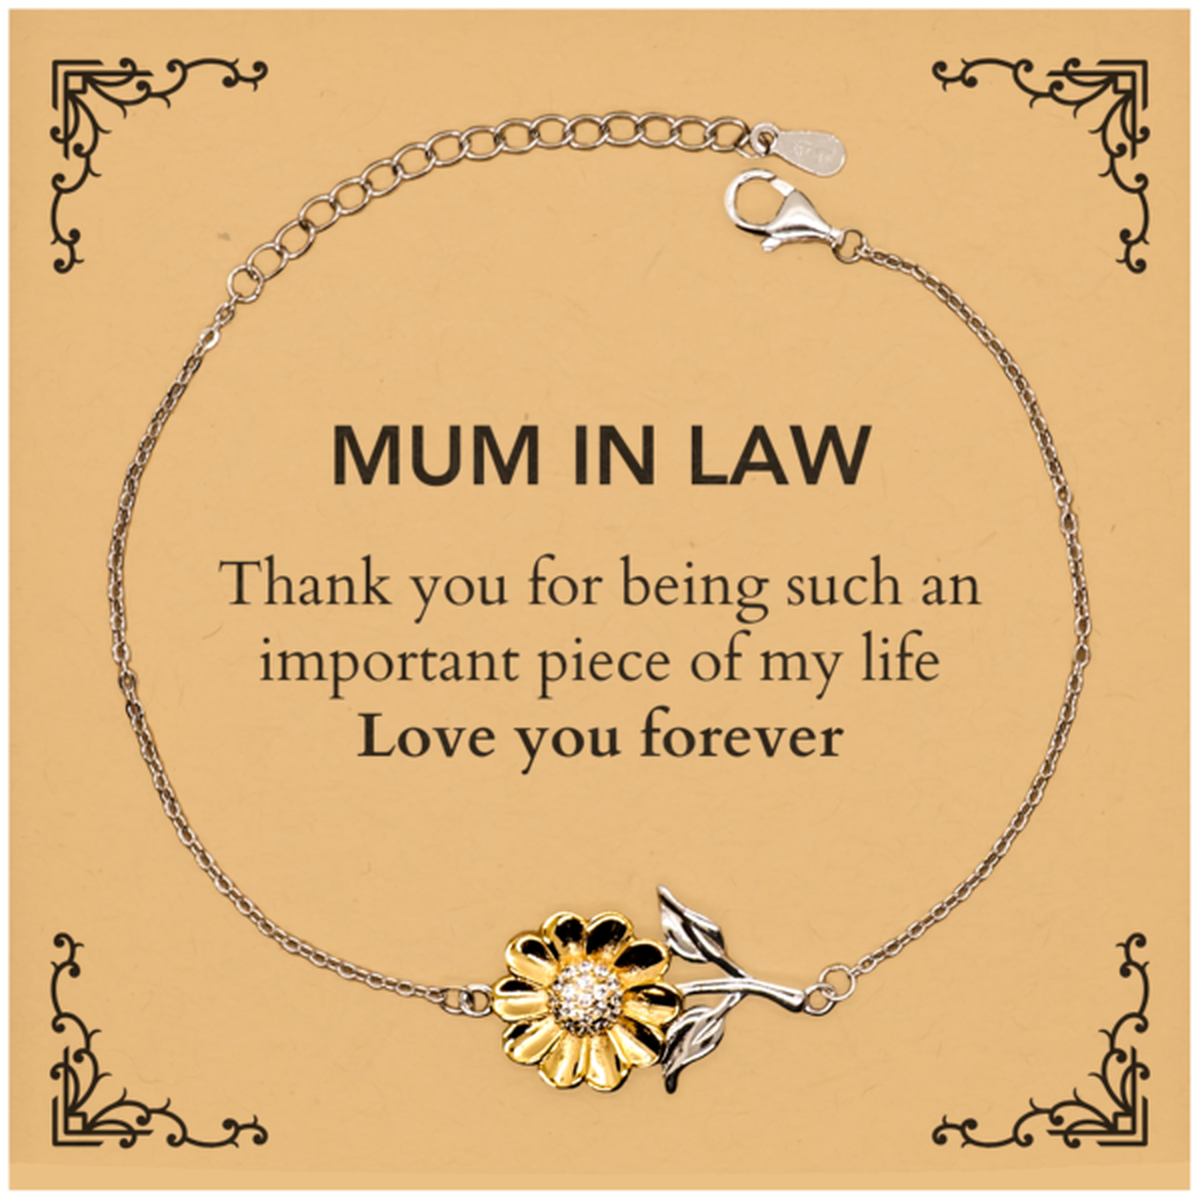 Appropriate Mum In Law  Sunflower Bracelet Epic Birthday Gifts for Mum In Law  Thank you for being such an important piece of my life Mum In Law  Christmas Mothers Fathers Day